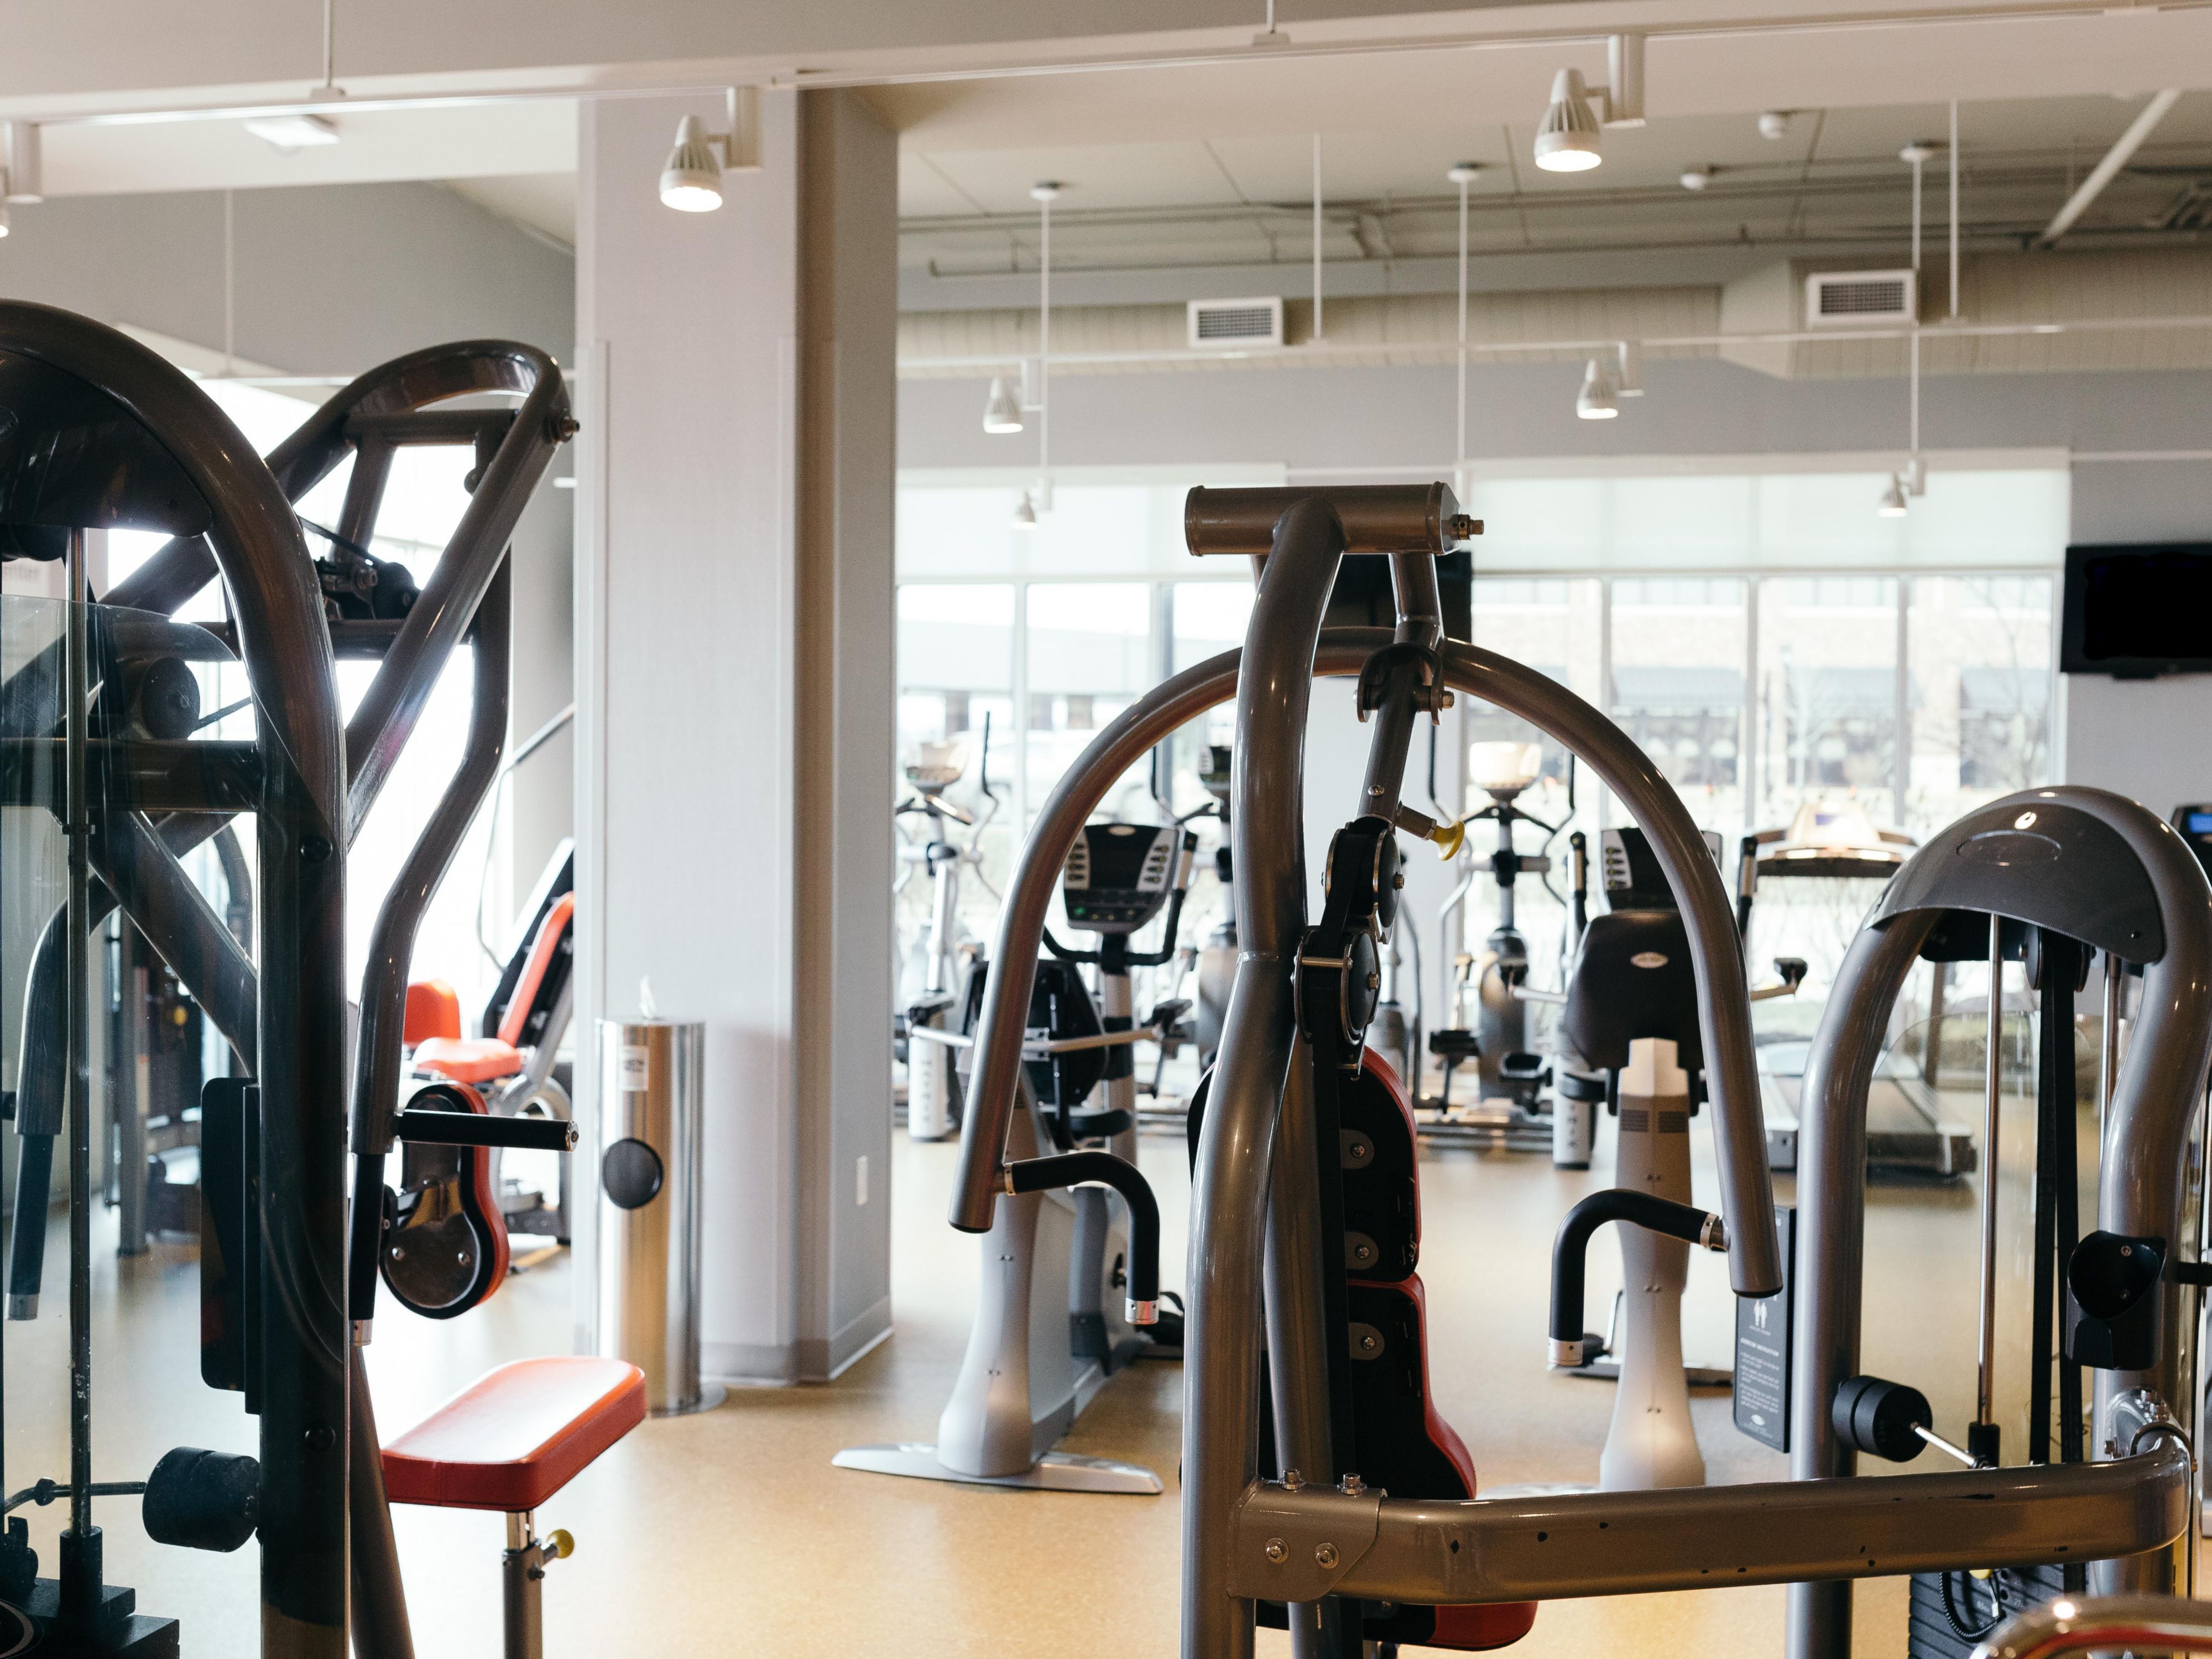 Are you into fitness? Our property was designed especially for you. We have a great assortment of equipment including weights, benches, ellipticals, treadmills, total gym centers, etc. -- All of this and a dedicated yoga area.